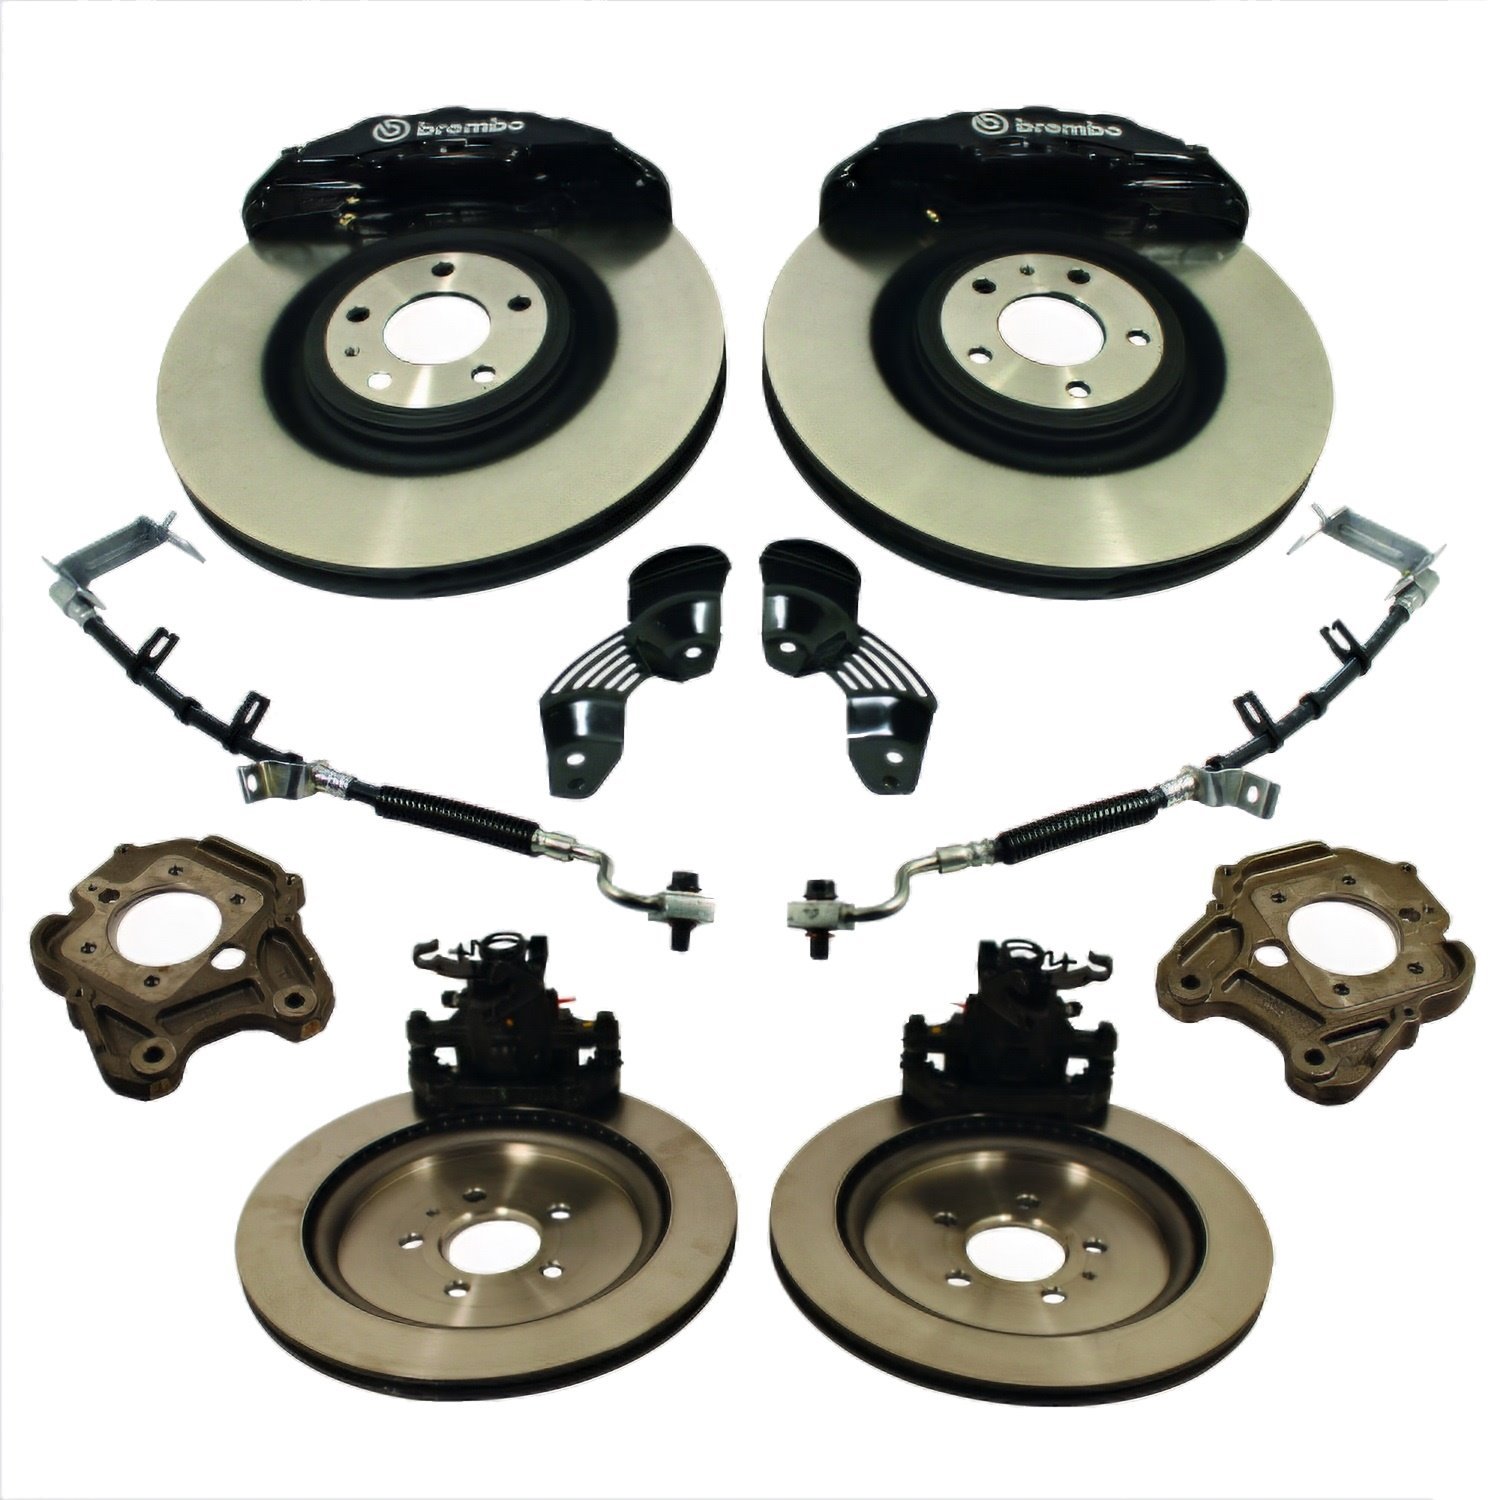 Complete Brake Upgrade Kit 2005-14 Mustang GT/Boss 302 Includes